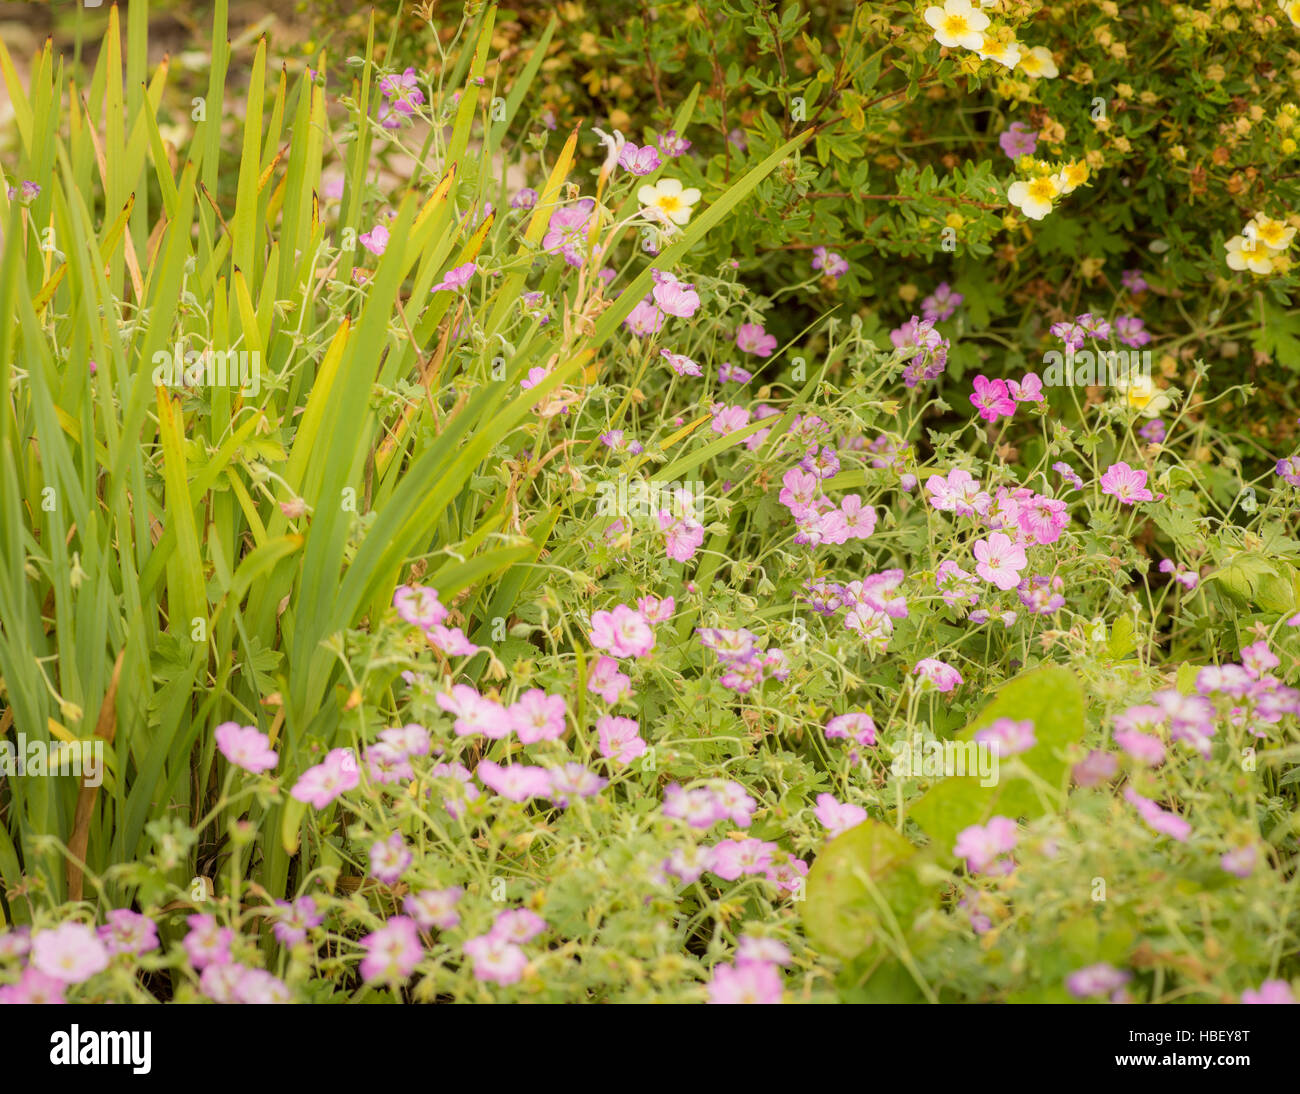 Mixed flower bed in English garden Stock Photo